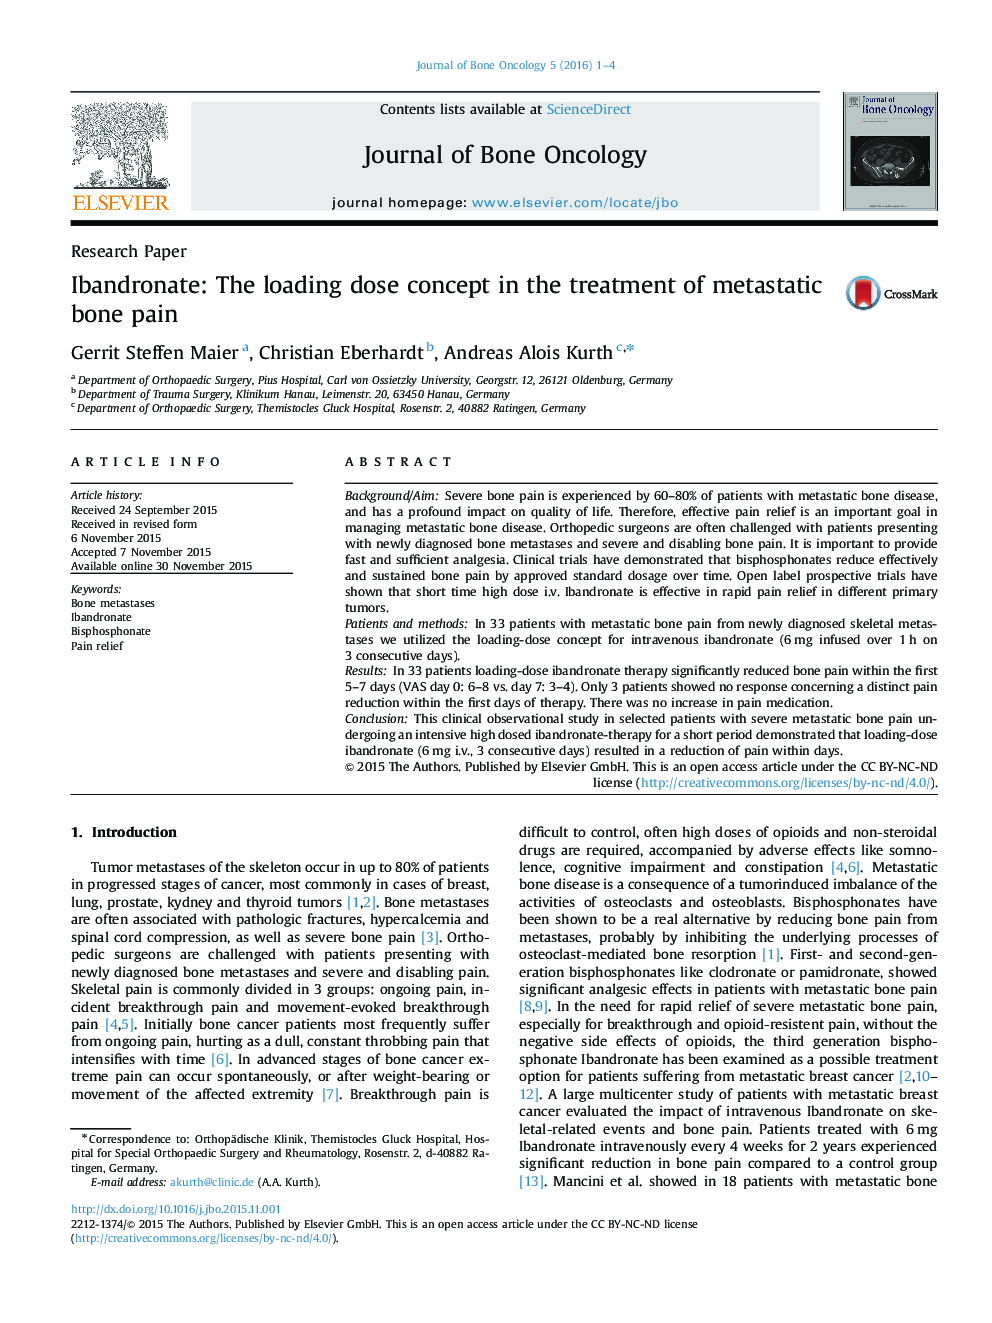 Ibandronate: The loading dose concept in the treatment of metastatic bone pain